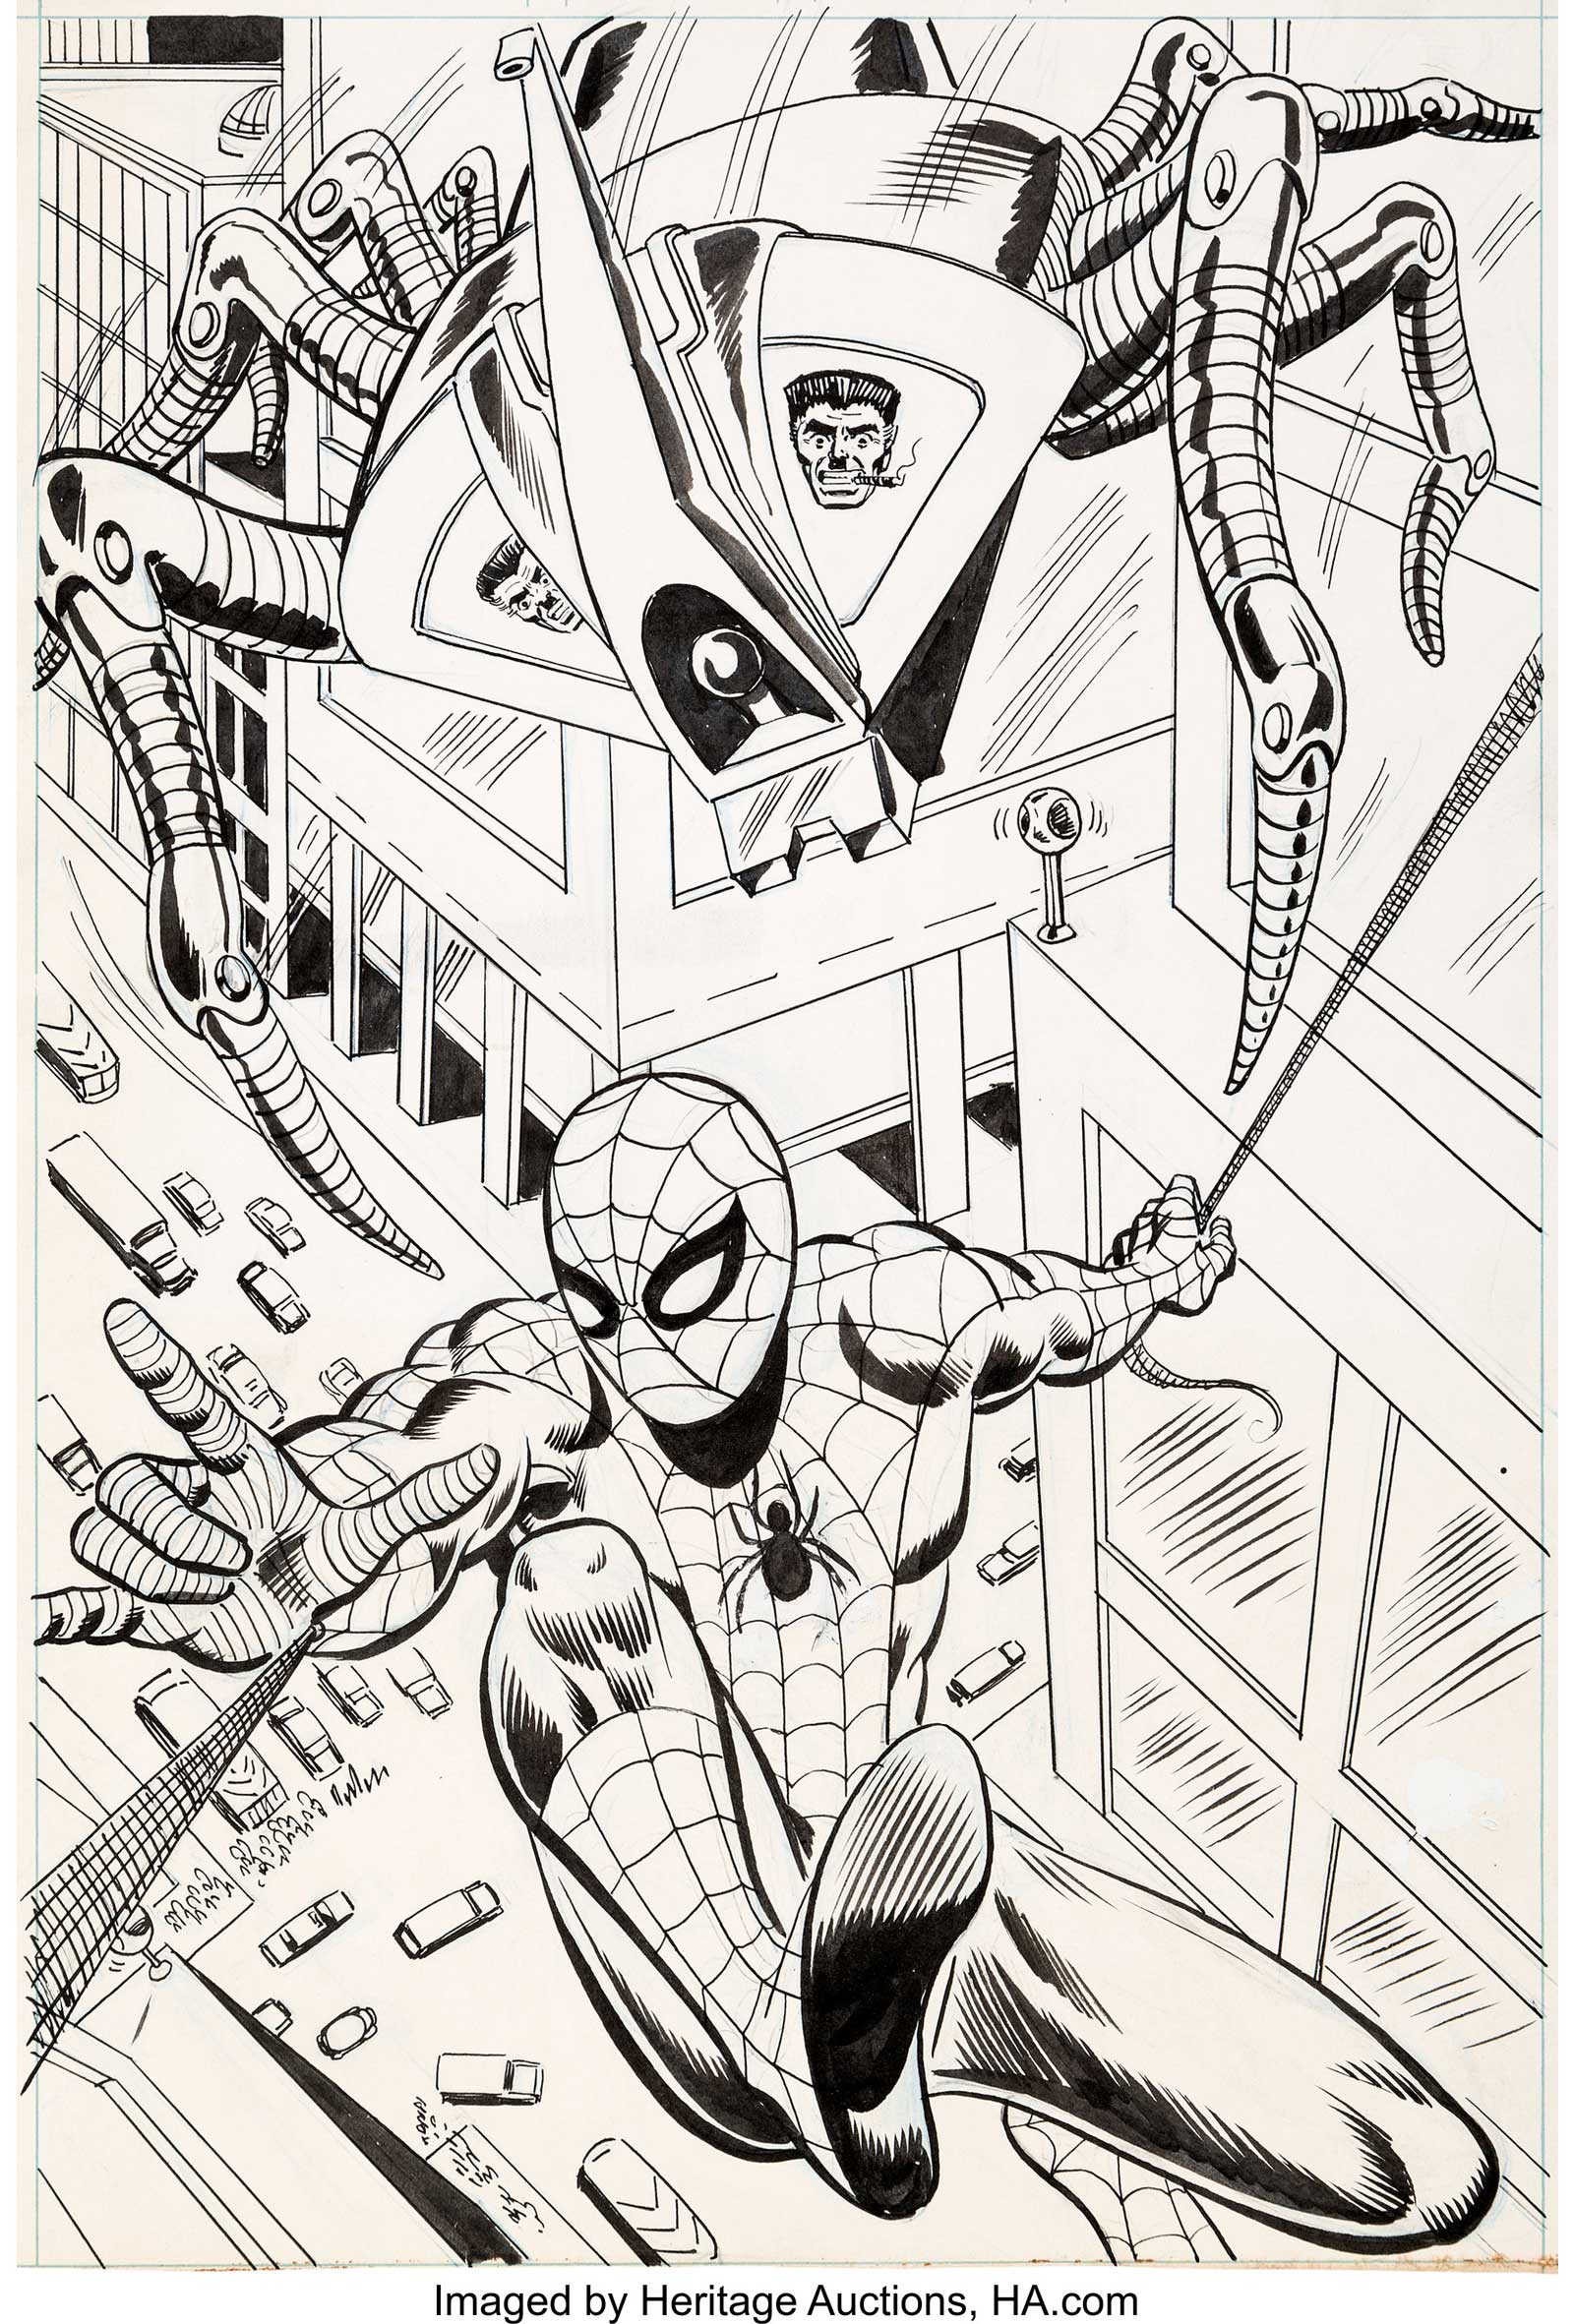 The splash page from Spider-Man Comics Weekly #149 published by Marvel UK in 1975, issue cover dated 20th December 1975. J. Jonah Jameson's Spider-Slayer robot is hot on the heels of Spidey as part of the title's ongoing reprinting of Amazing Spider-Man #105. 